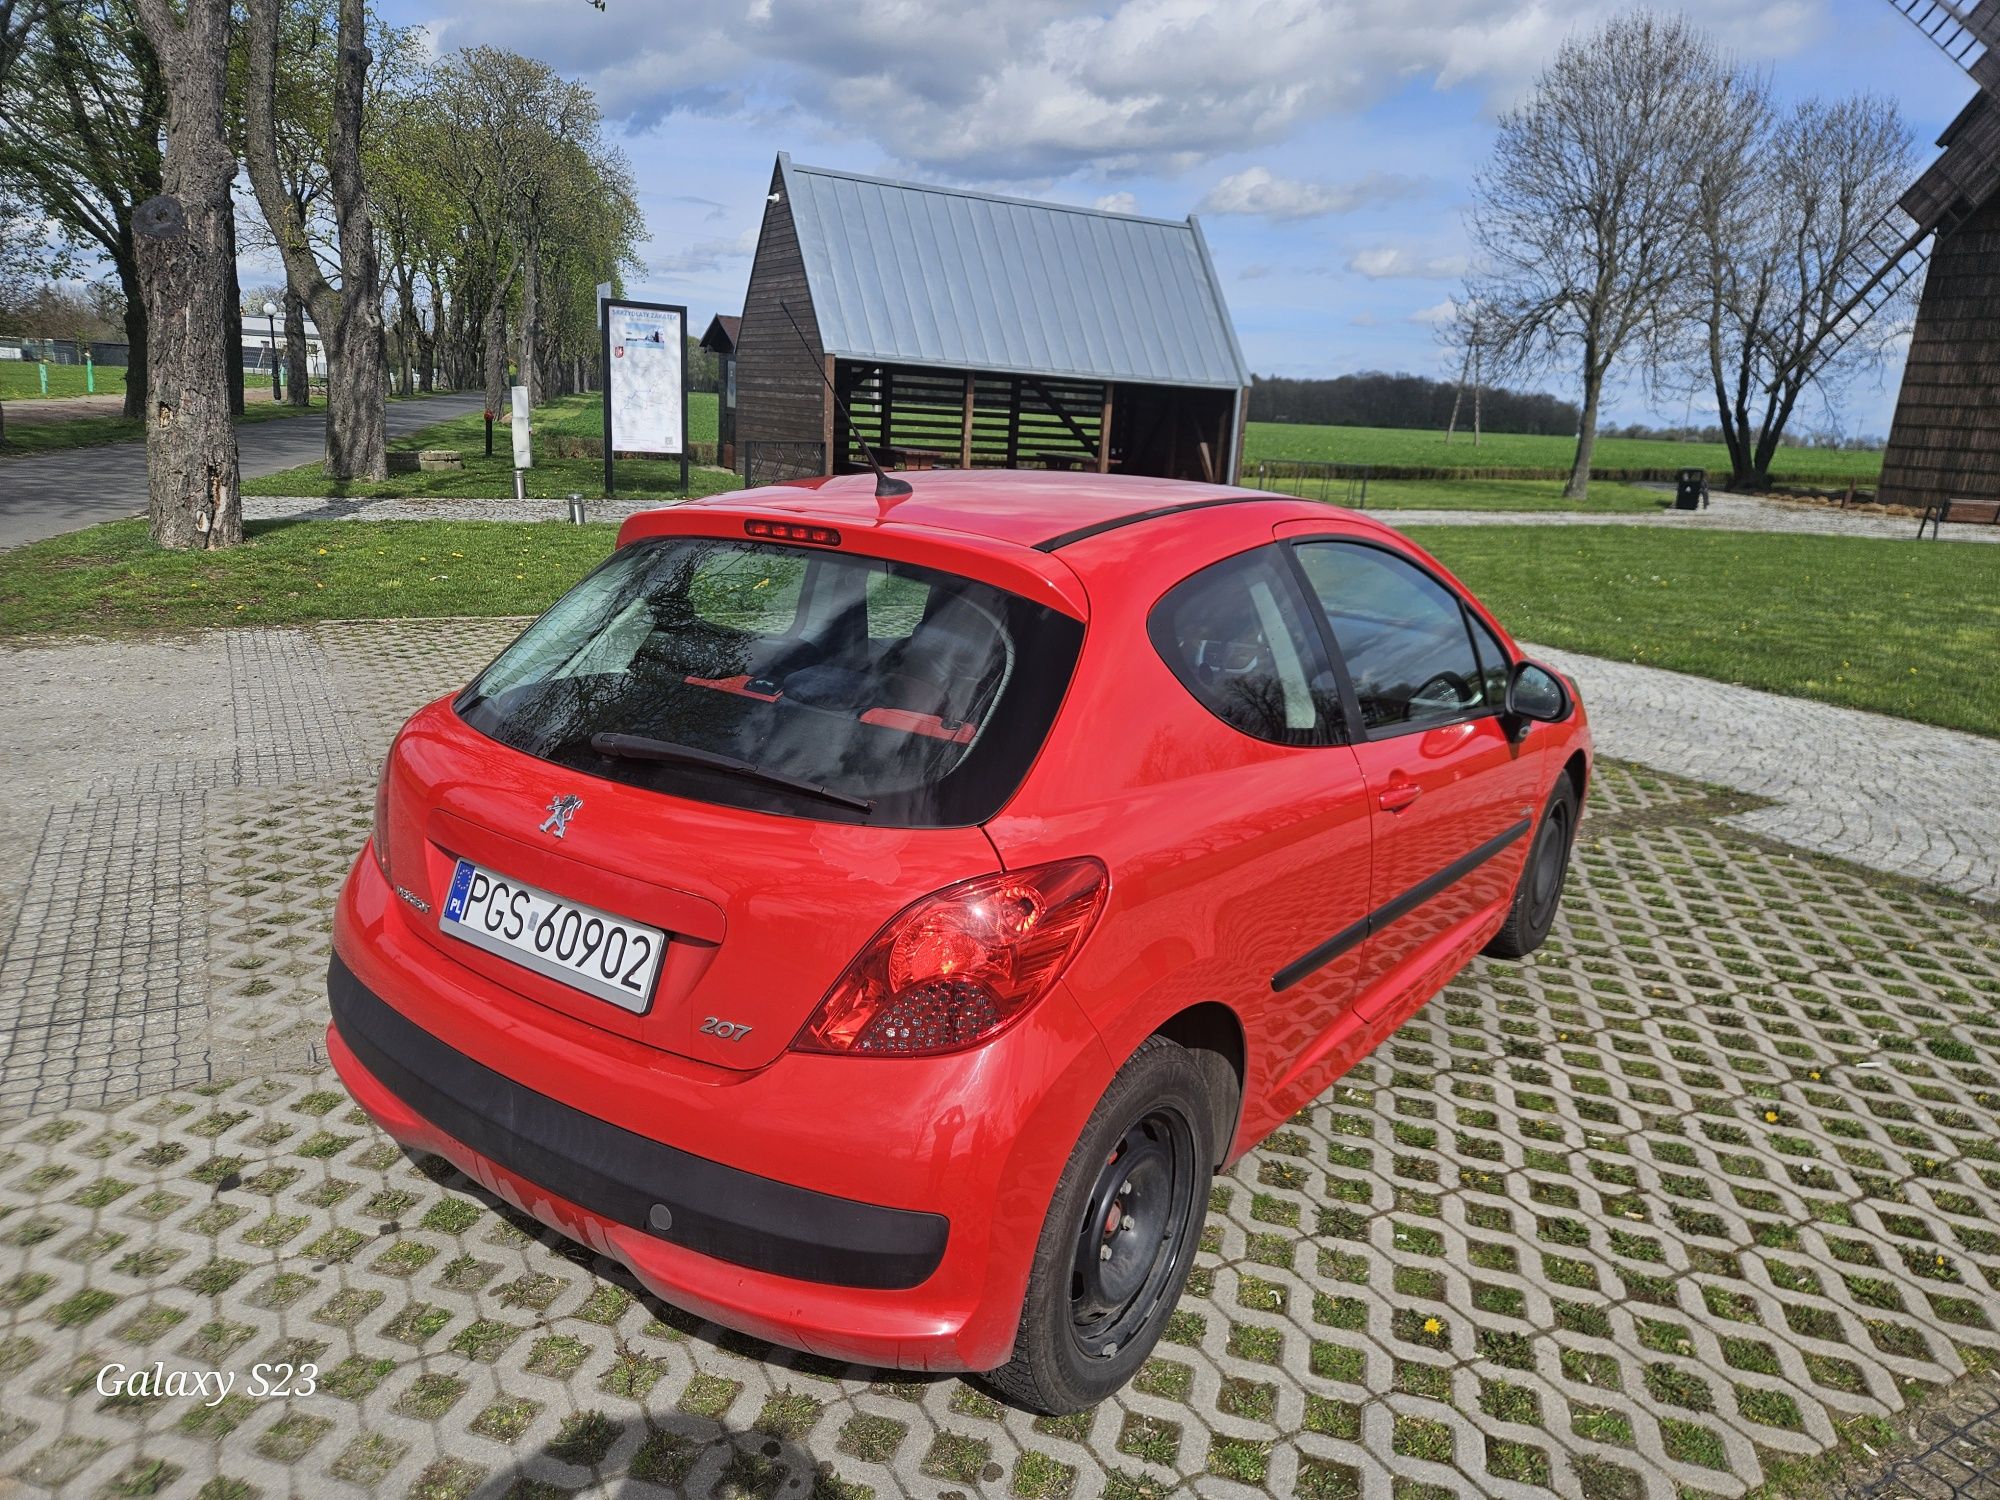 Peugeot 207 1.4 benzyna